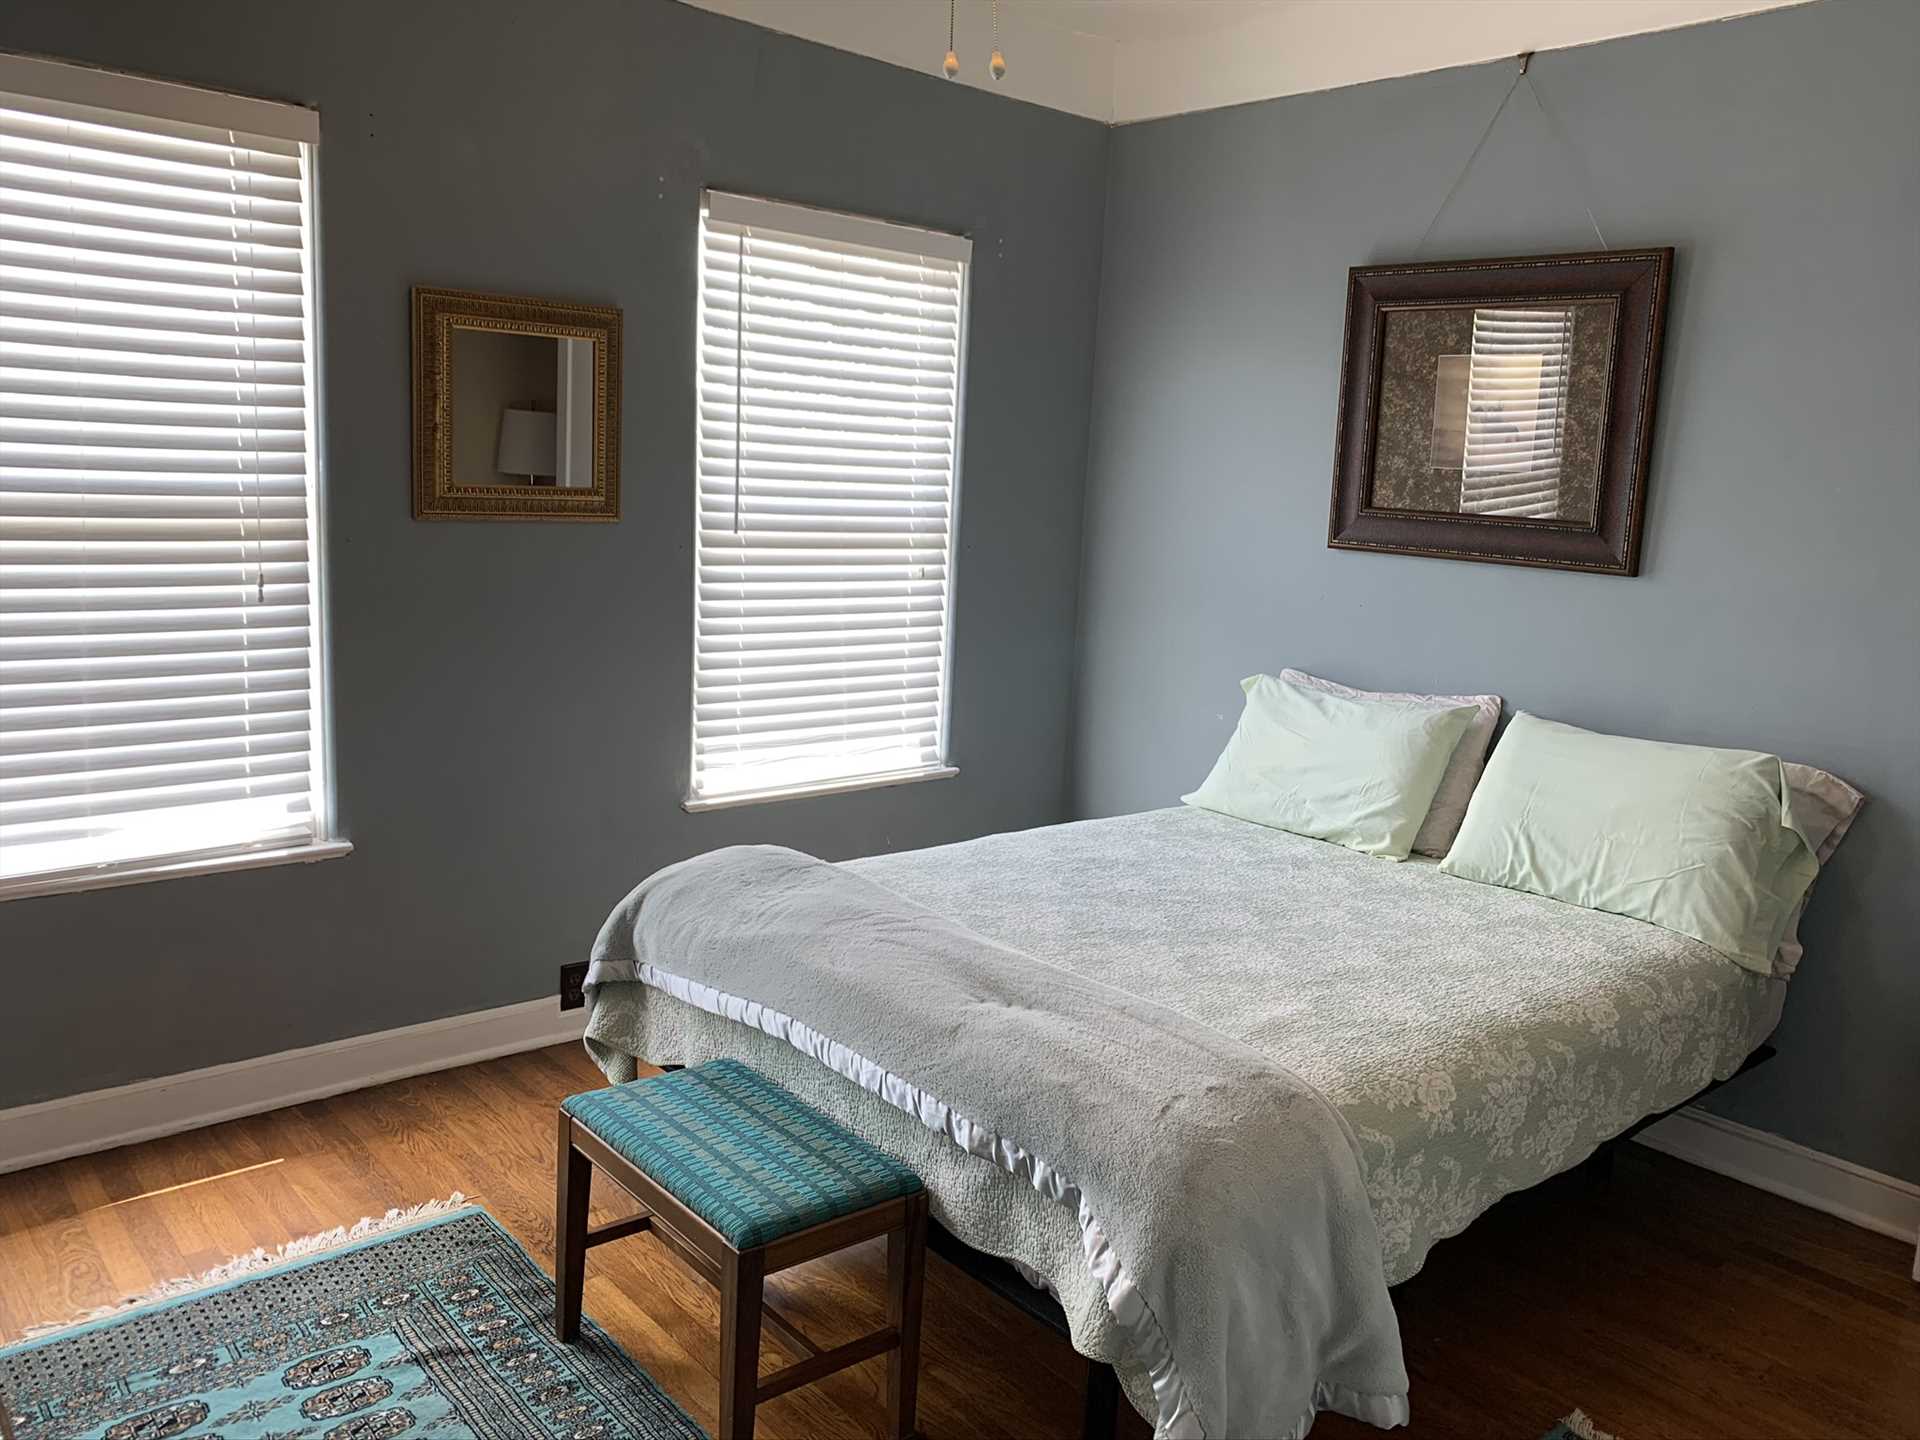                                                 The second bedroom is immediately adjacent to the master, and features a warm and soft double bed. Clean bed and bath linens are provided for everyone, too!